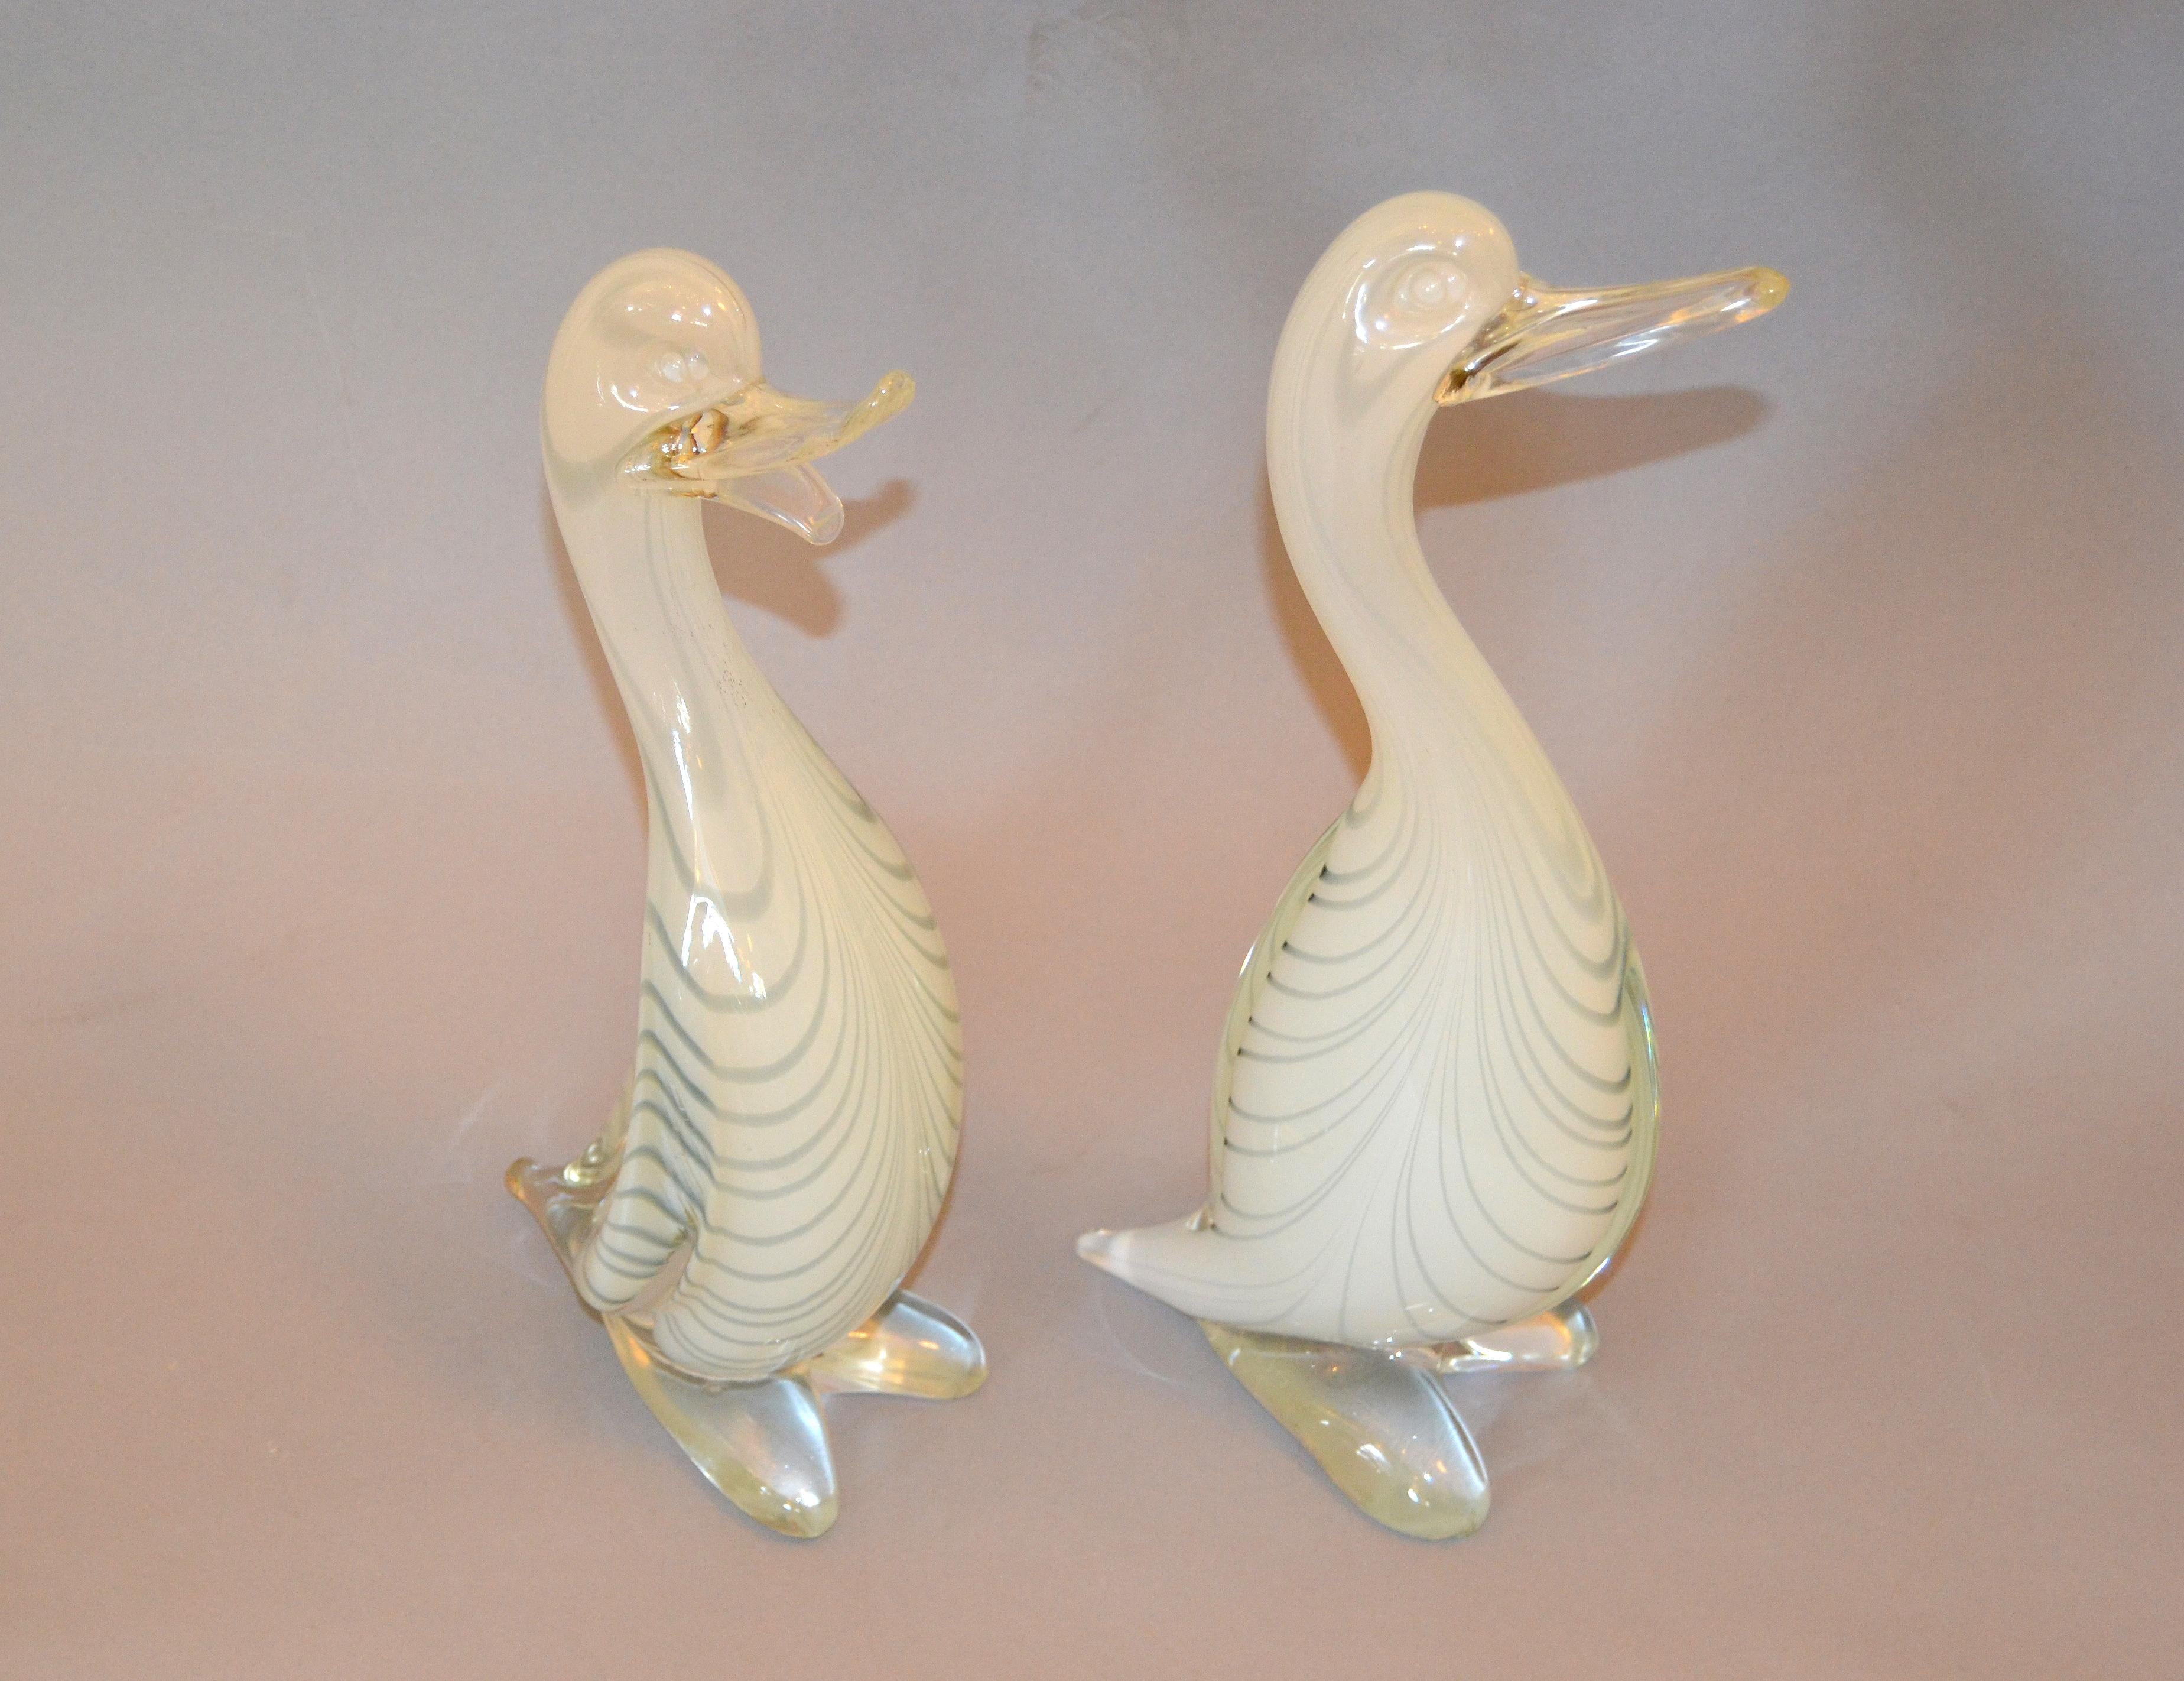 Beautiful 'Him and Her' Duck in hand blown Murano art glass ducks attributed to Archimede Seguso and made in Italy.
Simply lovely.

Measurements male:
Height 13.5 inches, length 3.5 inches, depth 5.25 inches 
Measurements Female:
Height 12.5